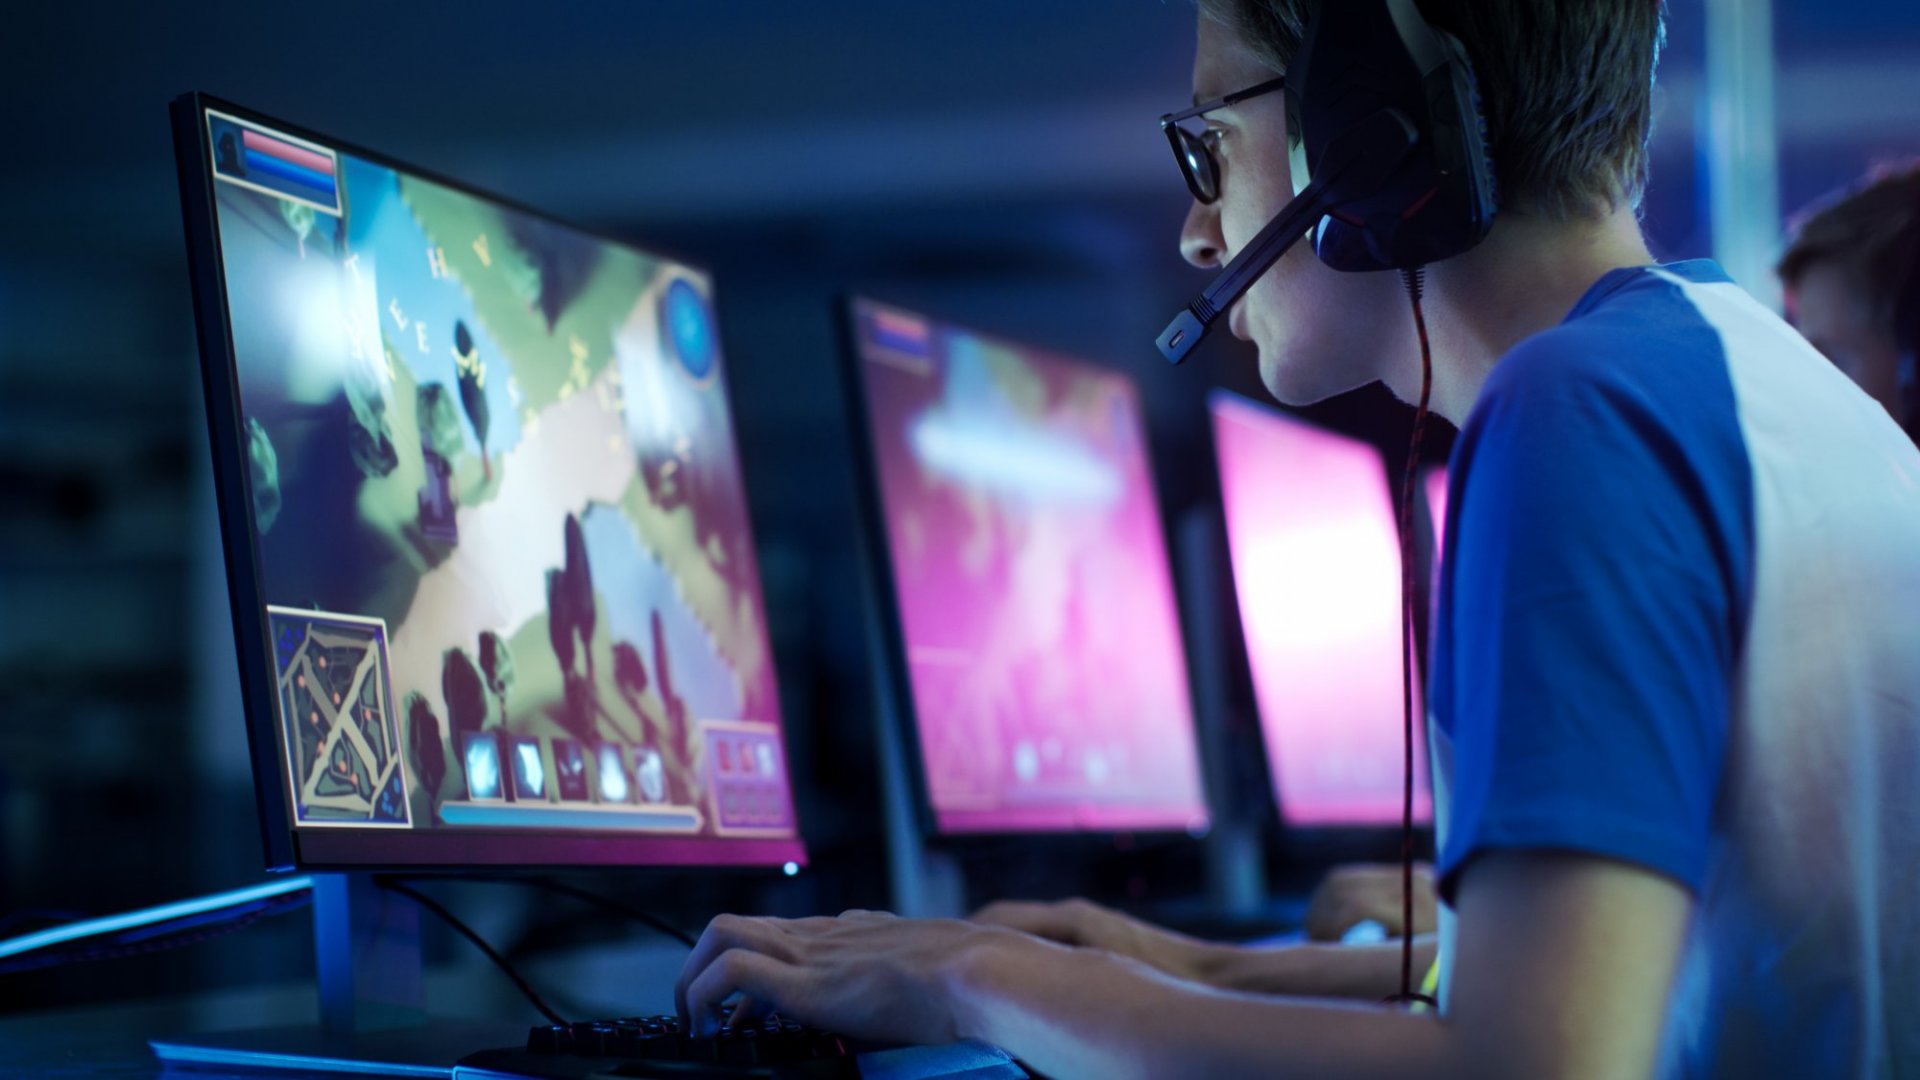 Innovative Leisure Activities: Exploring the World of Online Games